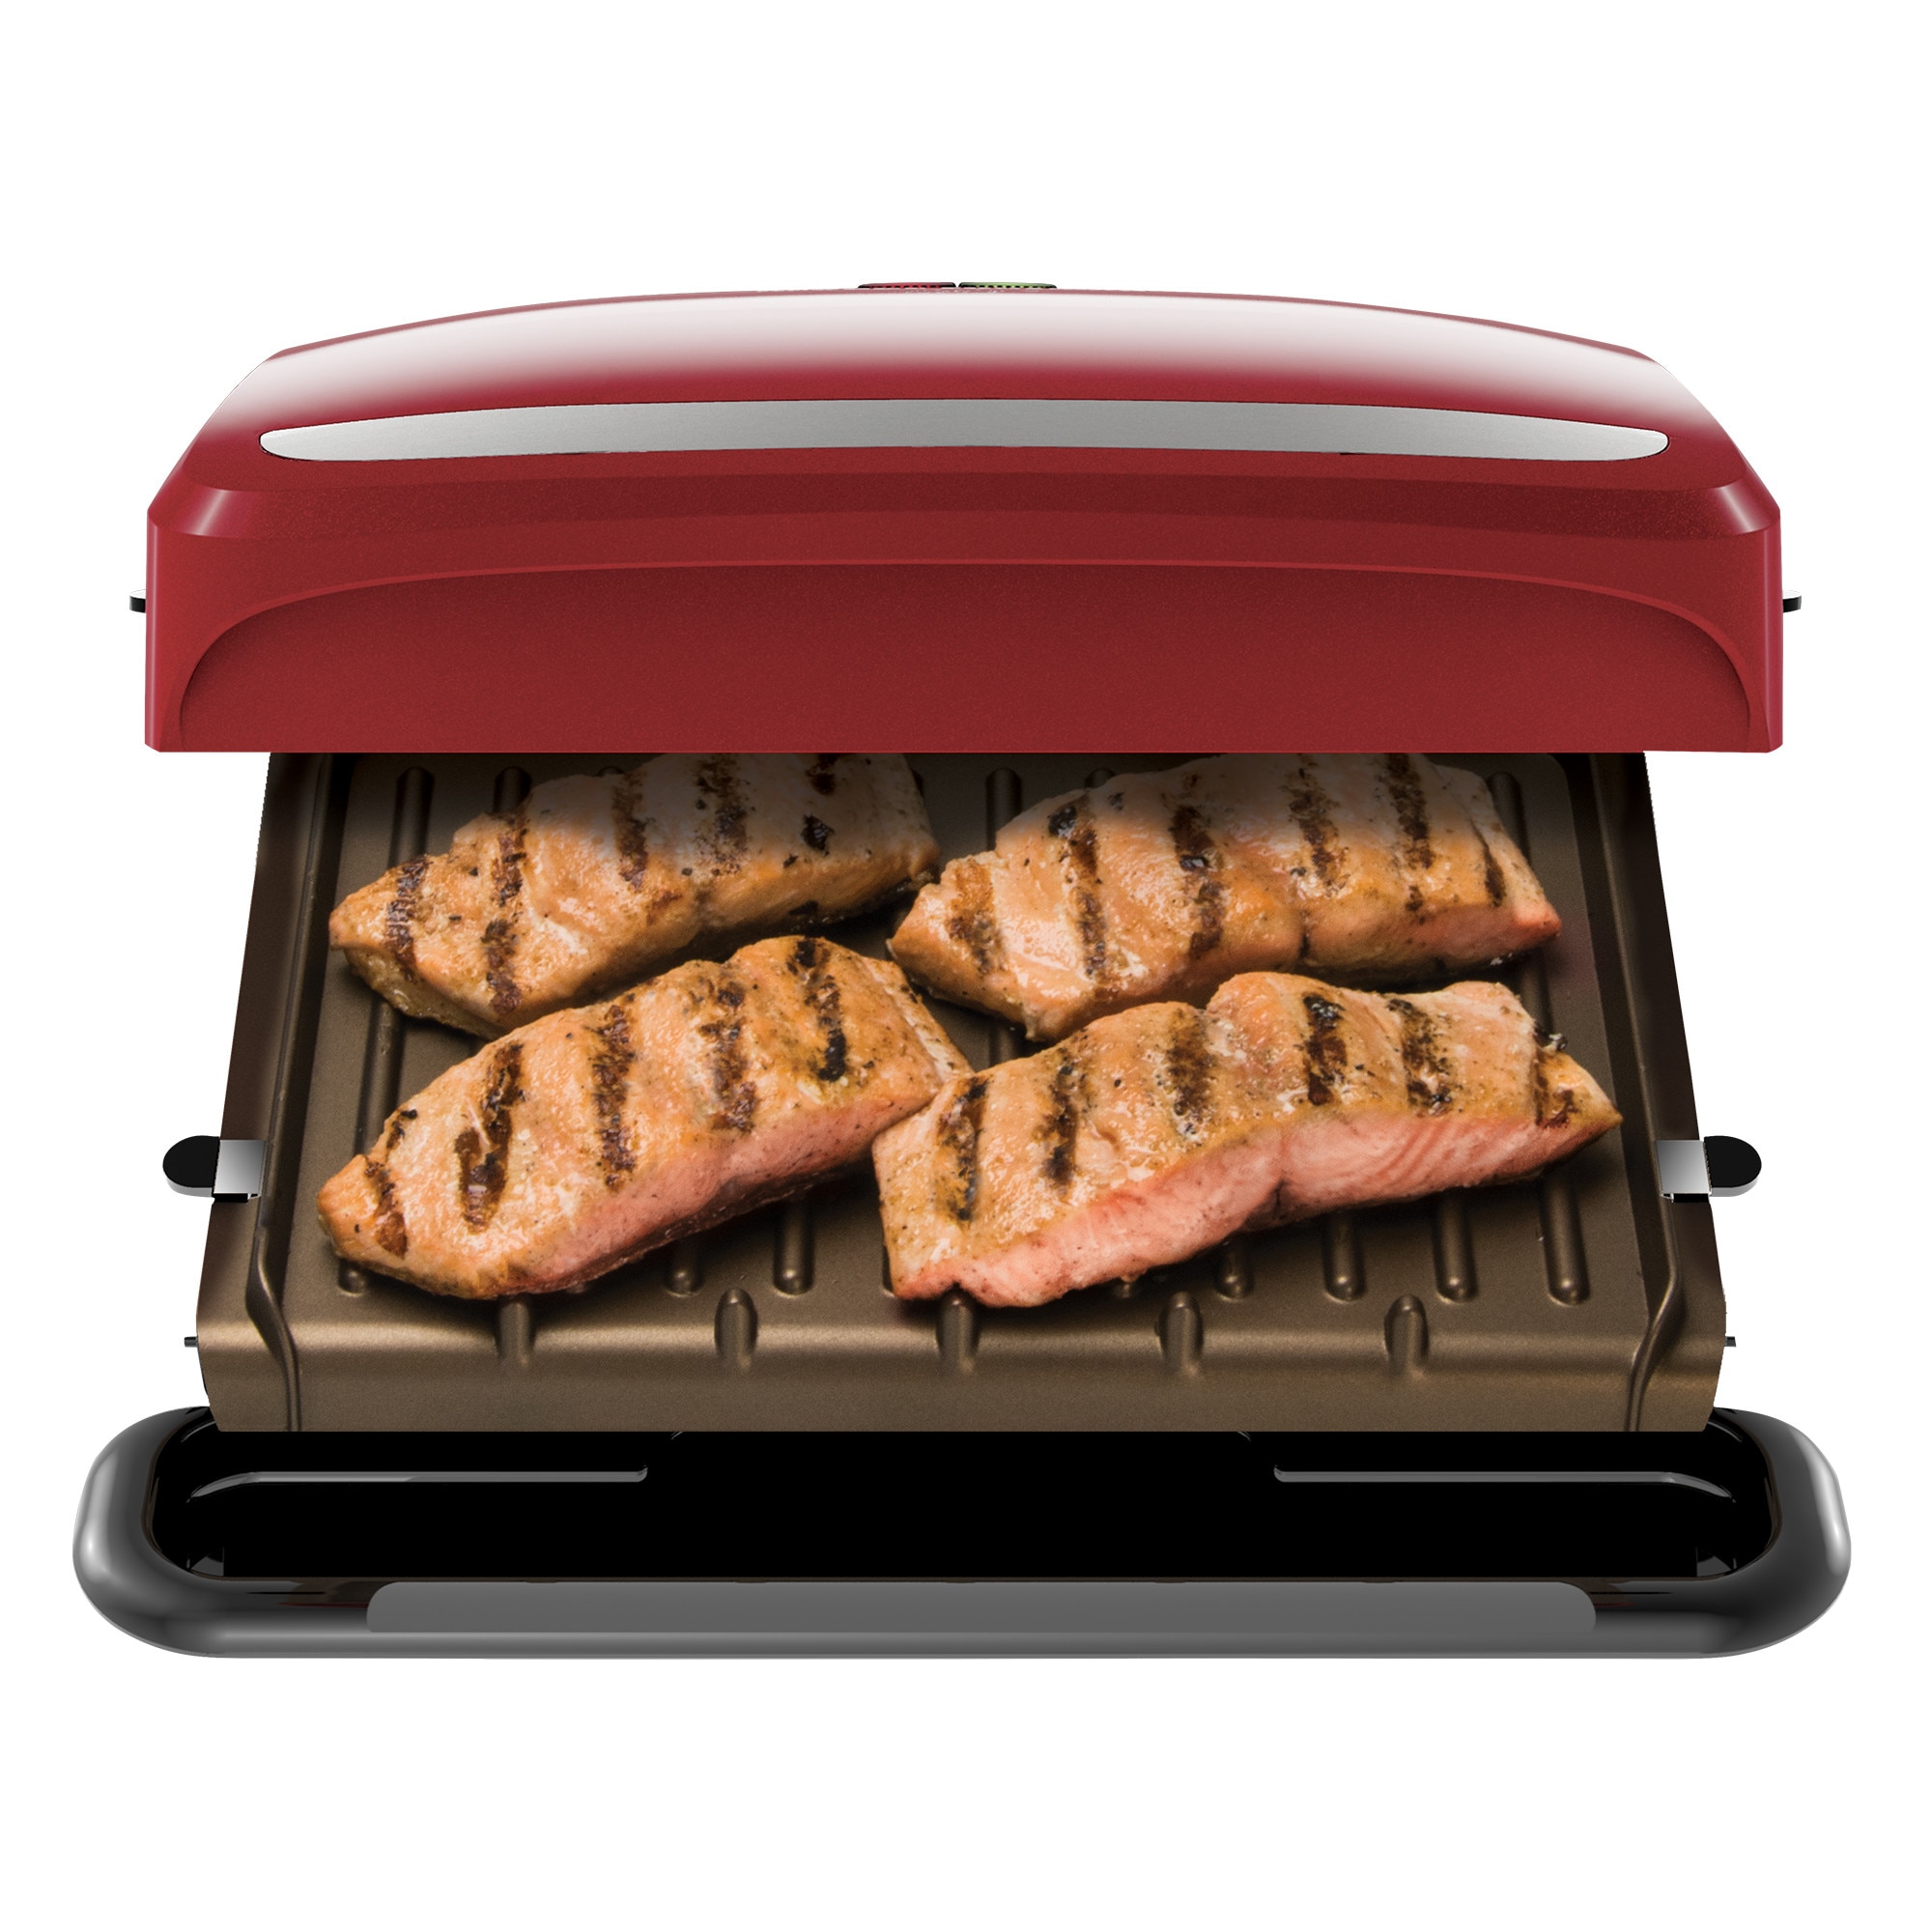 George Foreman 9.2-in L x 6.69-in W Non-Stick Residential in the